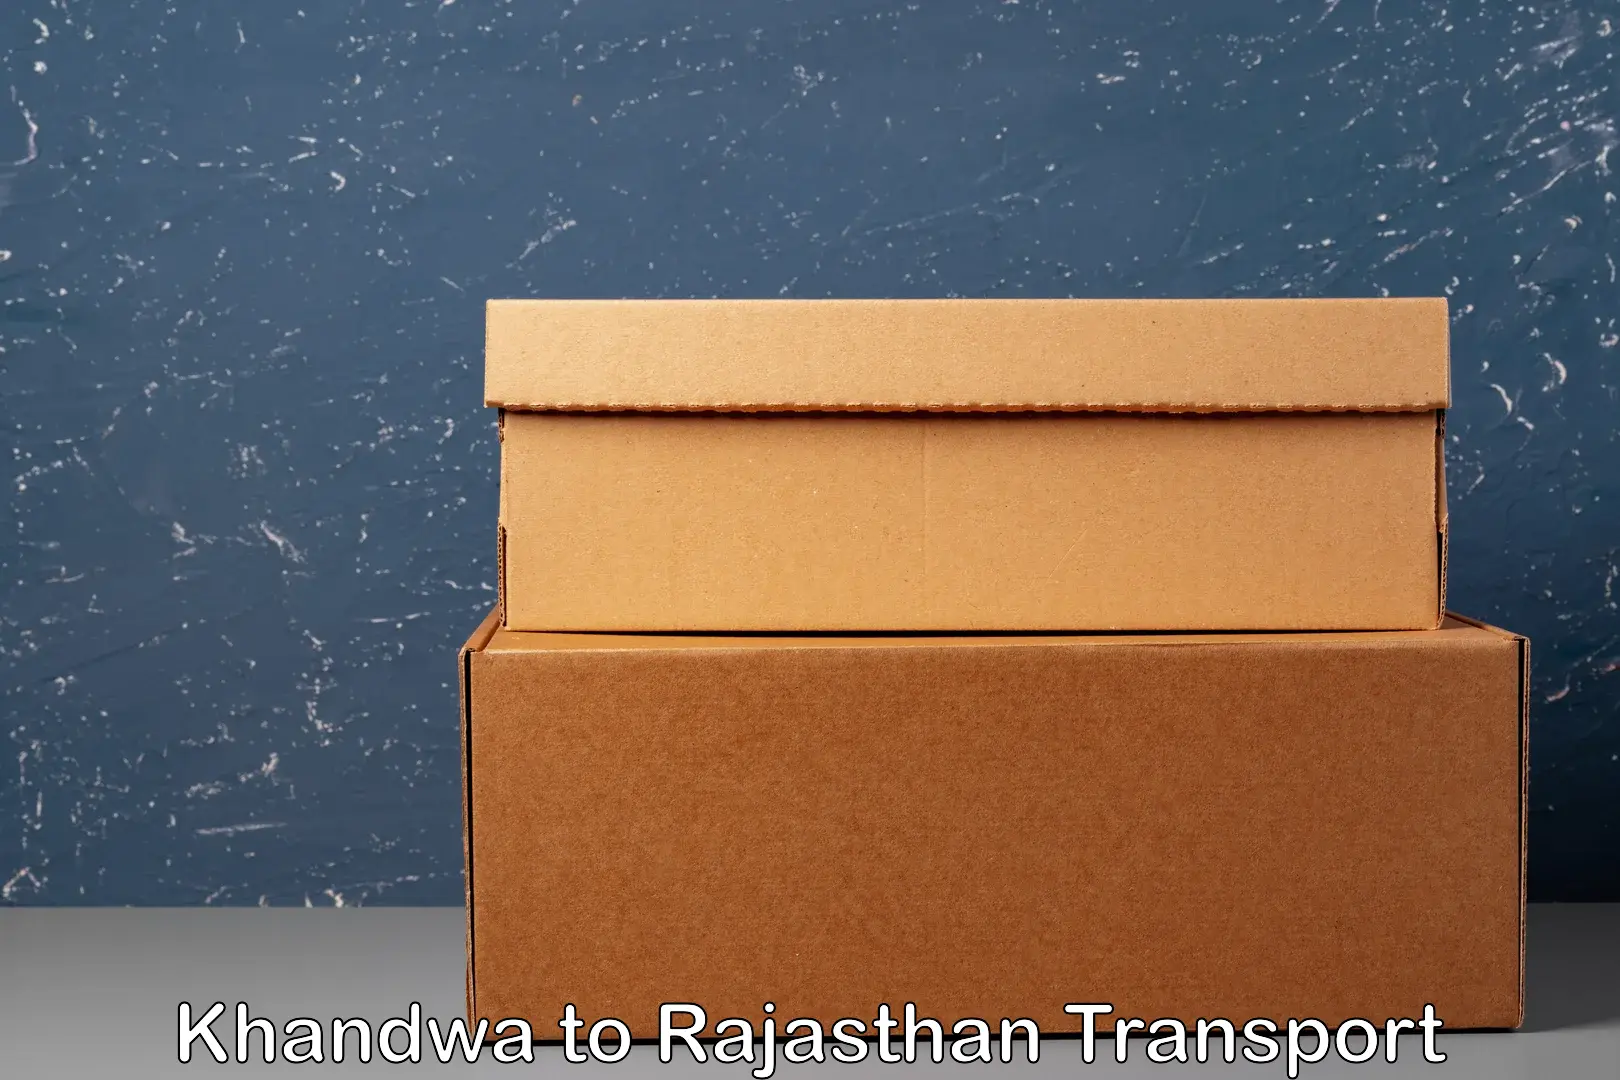 Air cargo transport services Khandwa to Yeswanthapur